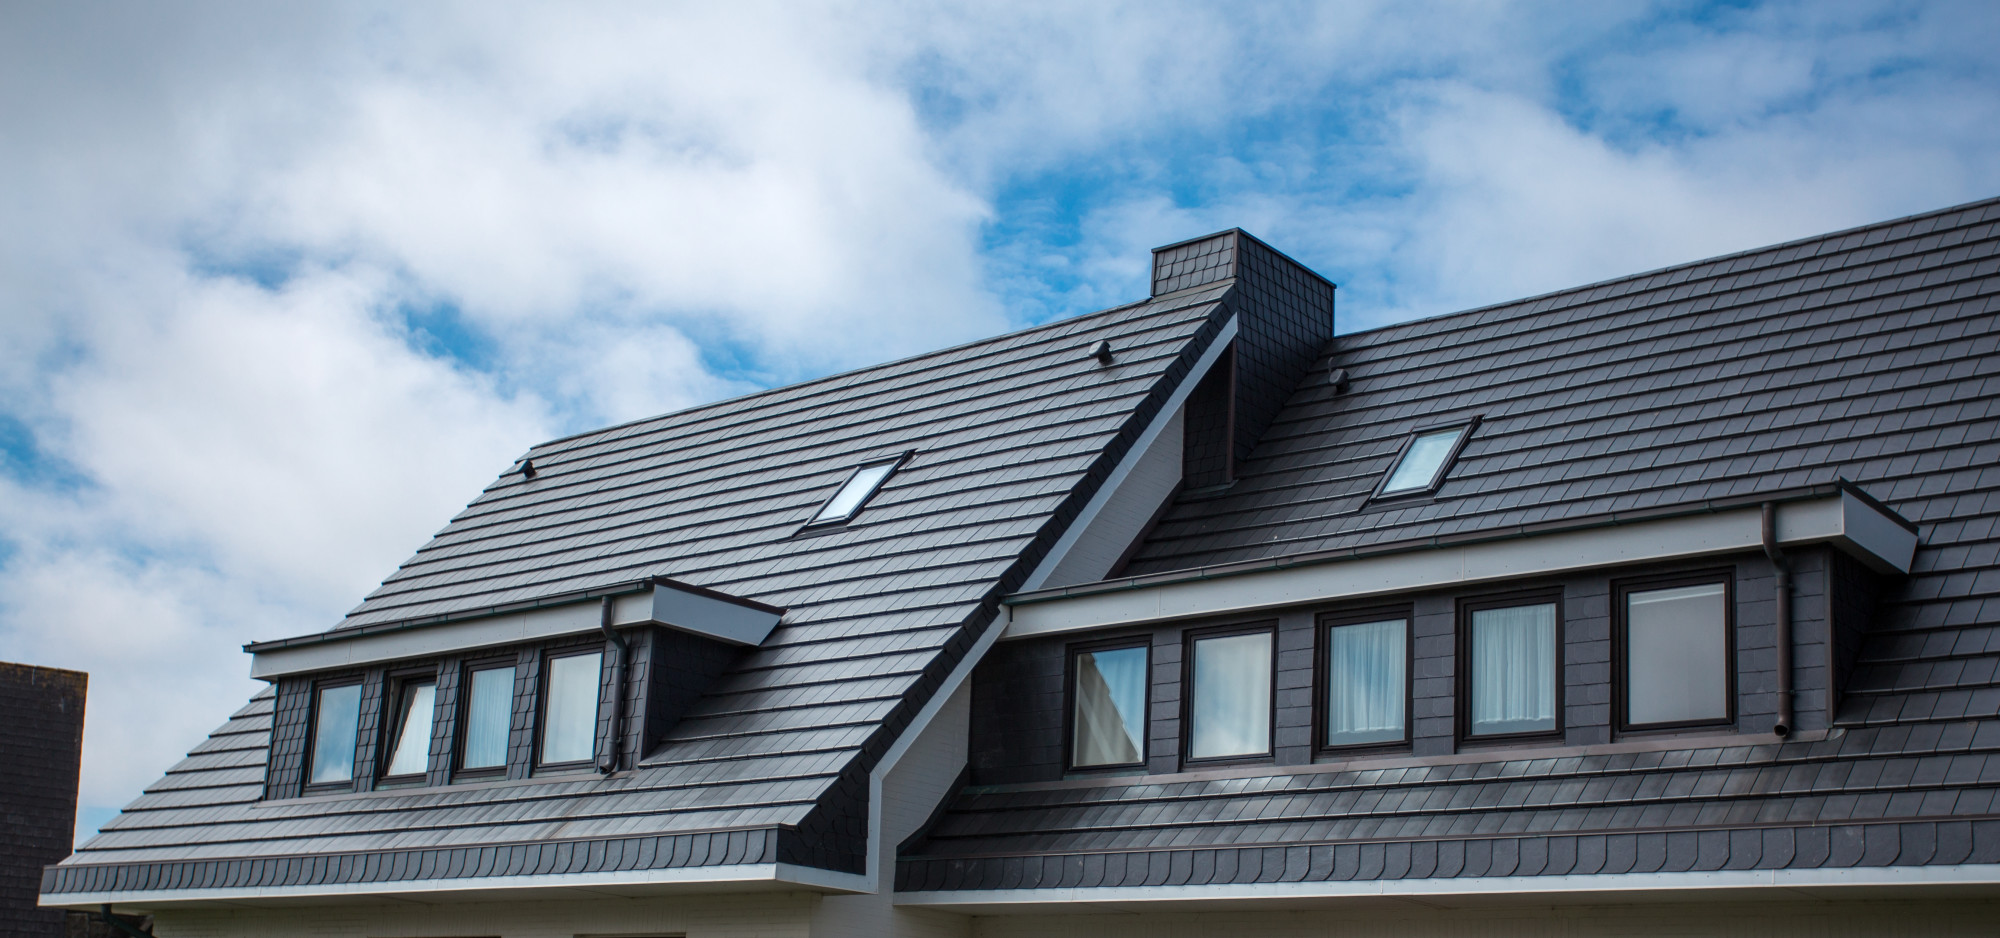 It's important that you understand how long your roof will last. Keep reading to learn more about the average lifespan of a roof.